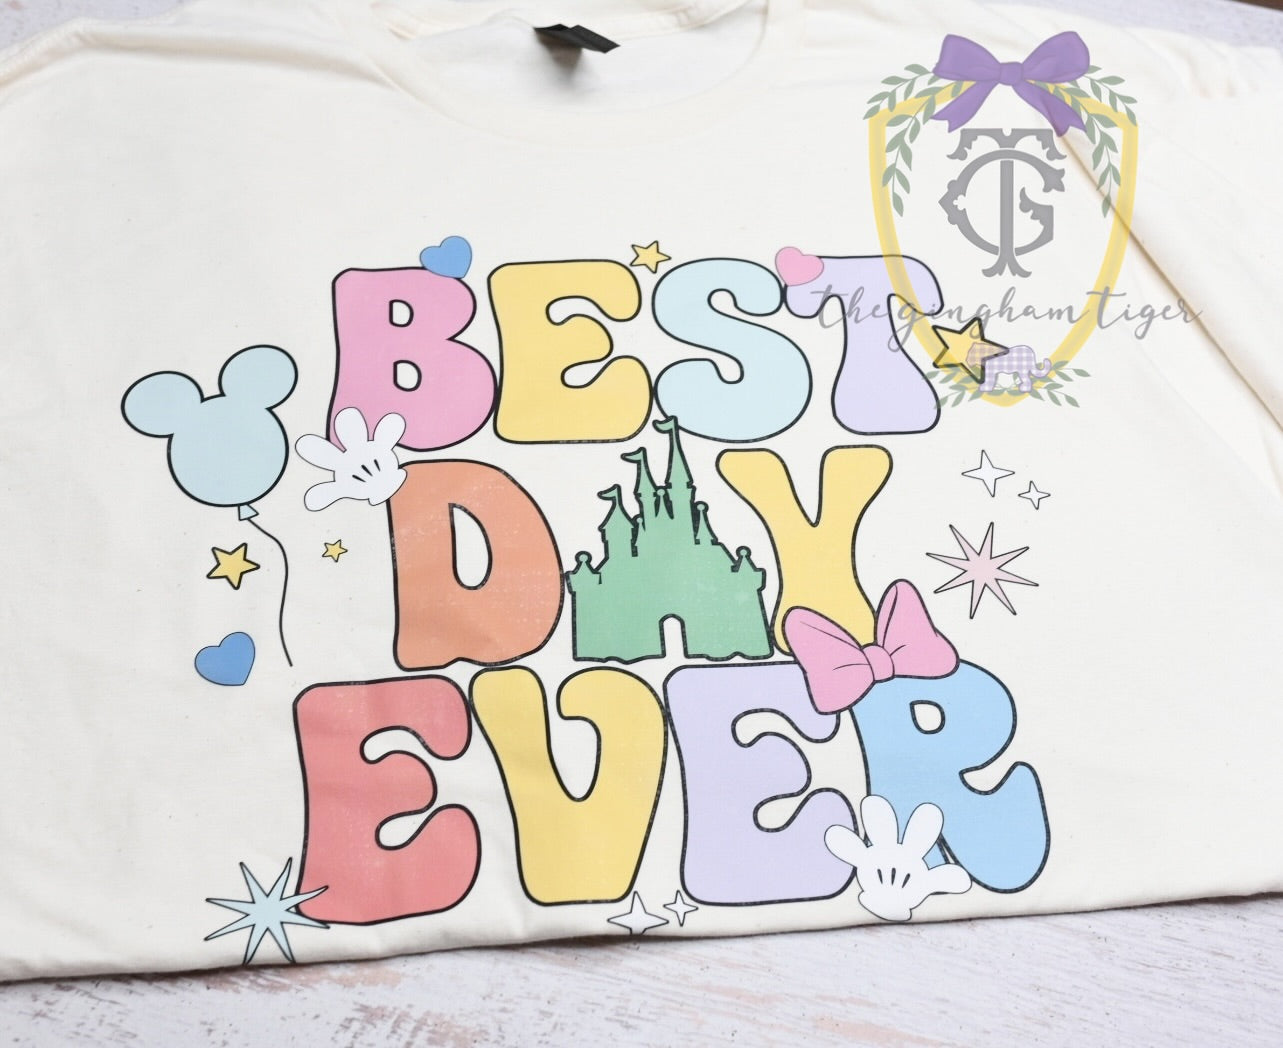 Best Day Ever Tee